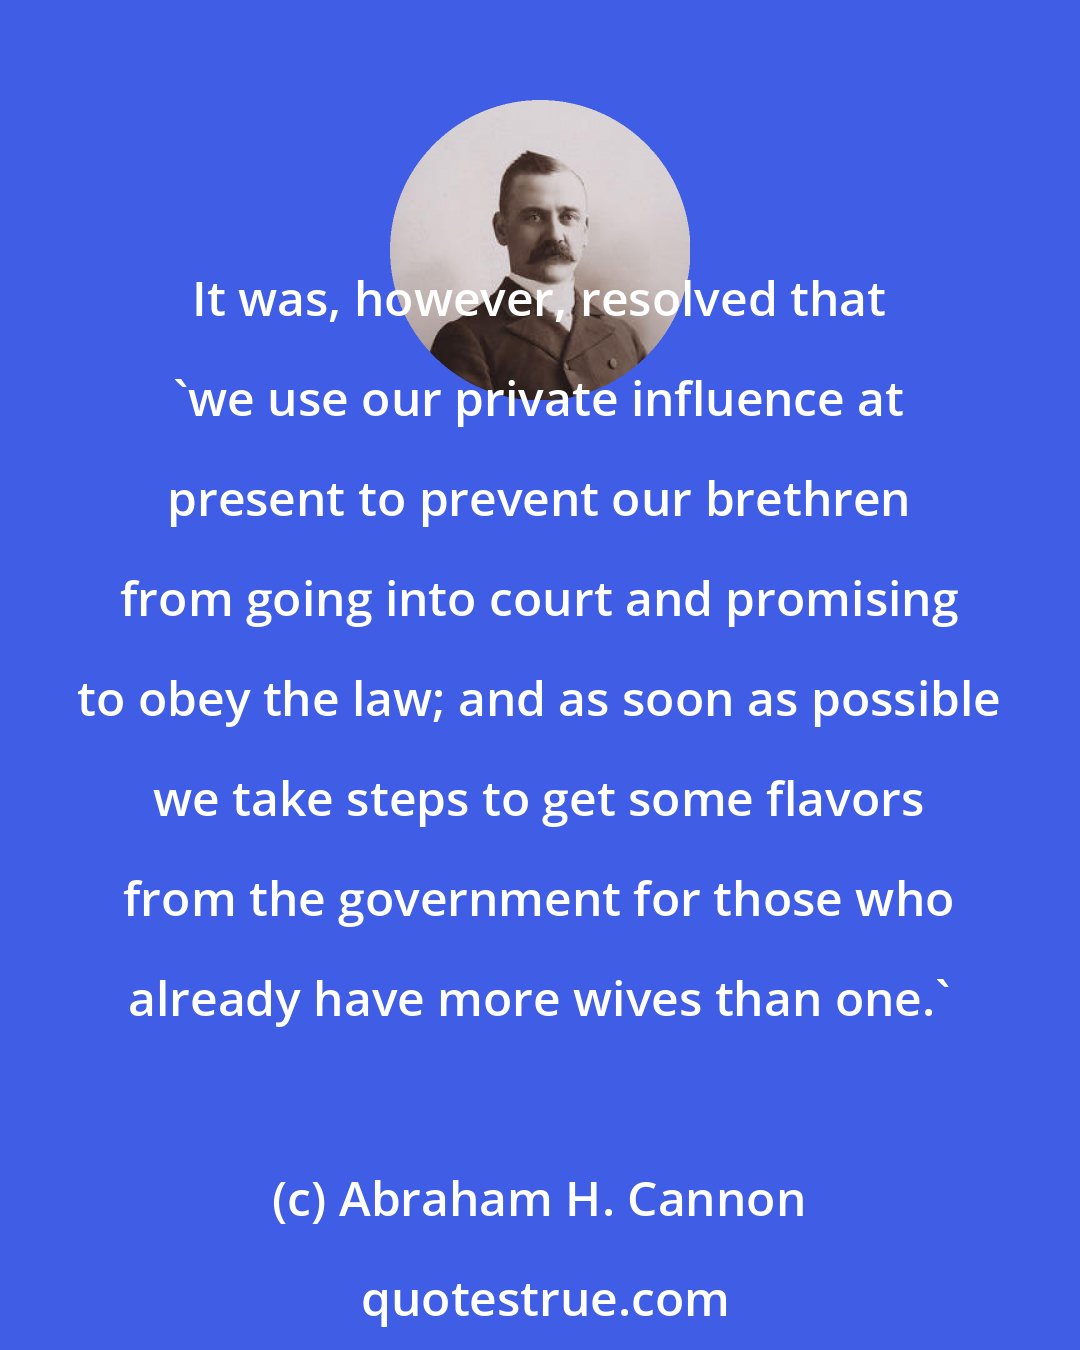 Abraham H. Cannon: It was, however, resolved that 'we use our private influence at present to prevent our brethren from going into court and promising to obey the law; and as soon as possible we take steps to get some flavors from the government for those who already have more wives than one.'